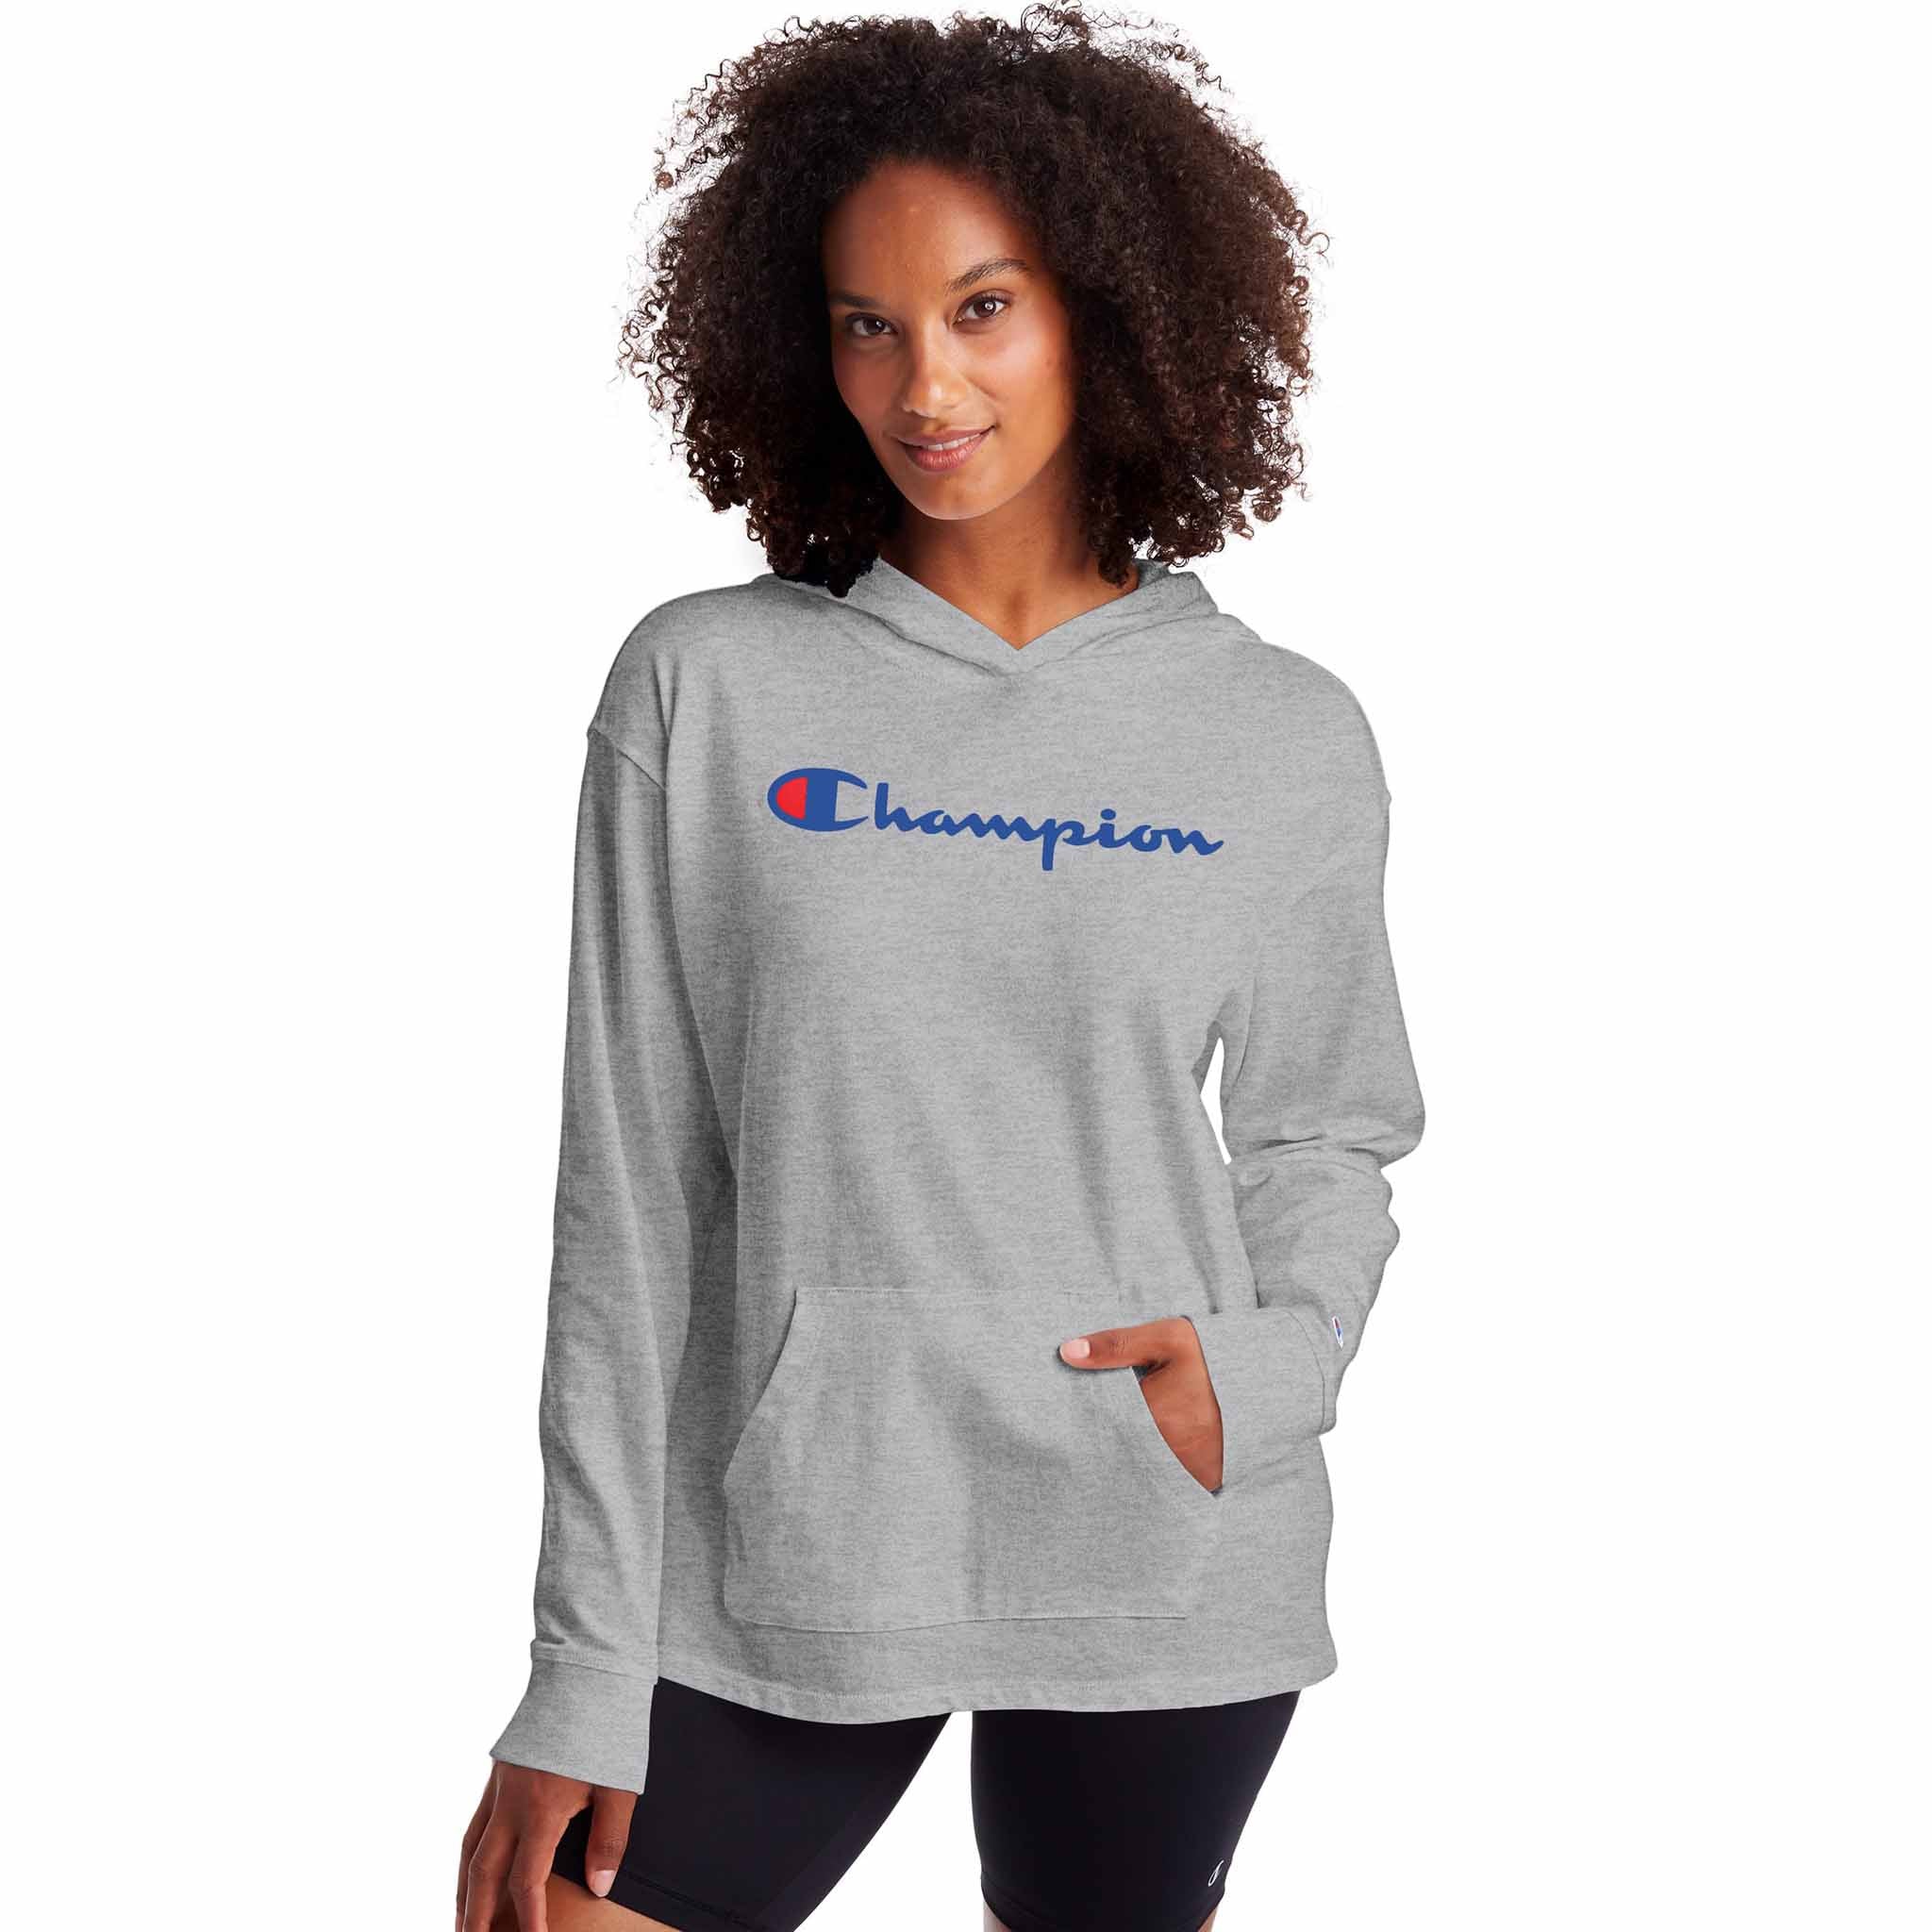 Champion Middleweight Hoodie sweatshirts pour femme - Soccer Sport Fitness